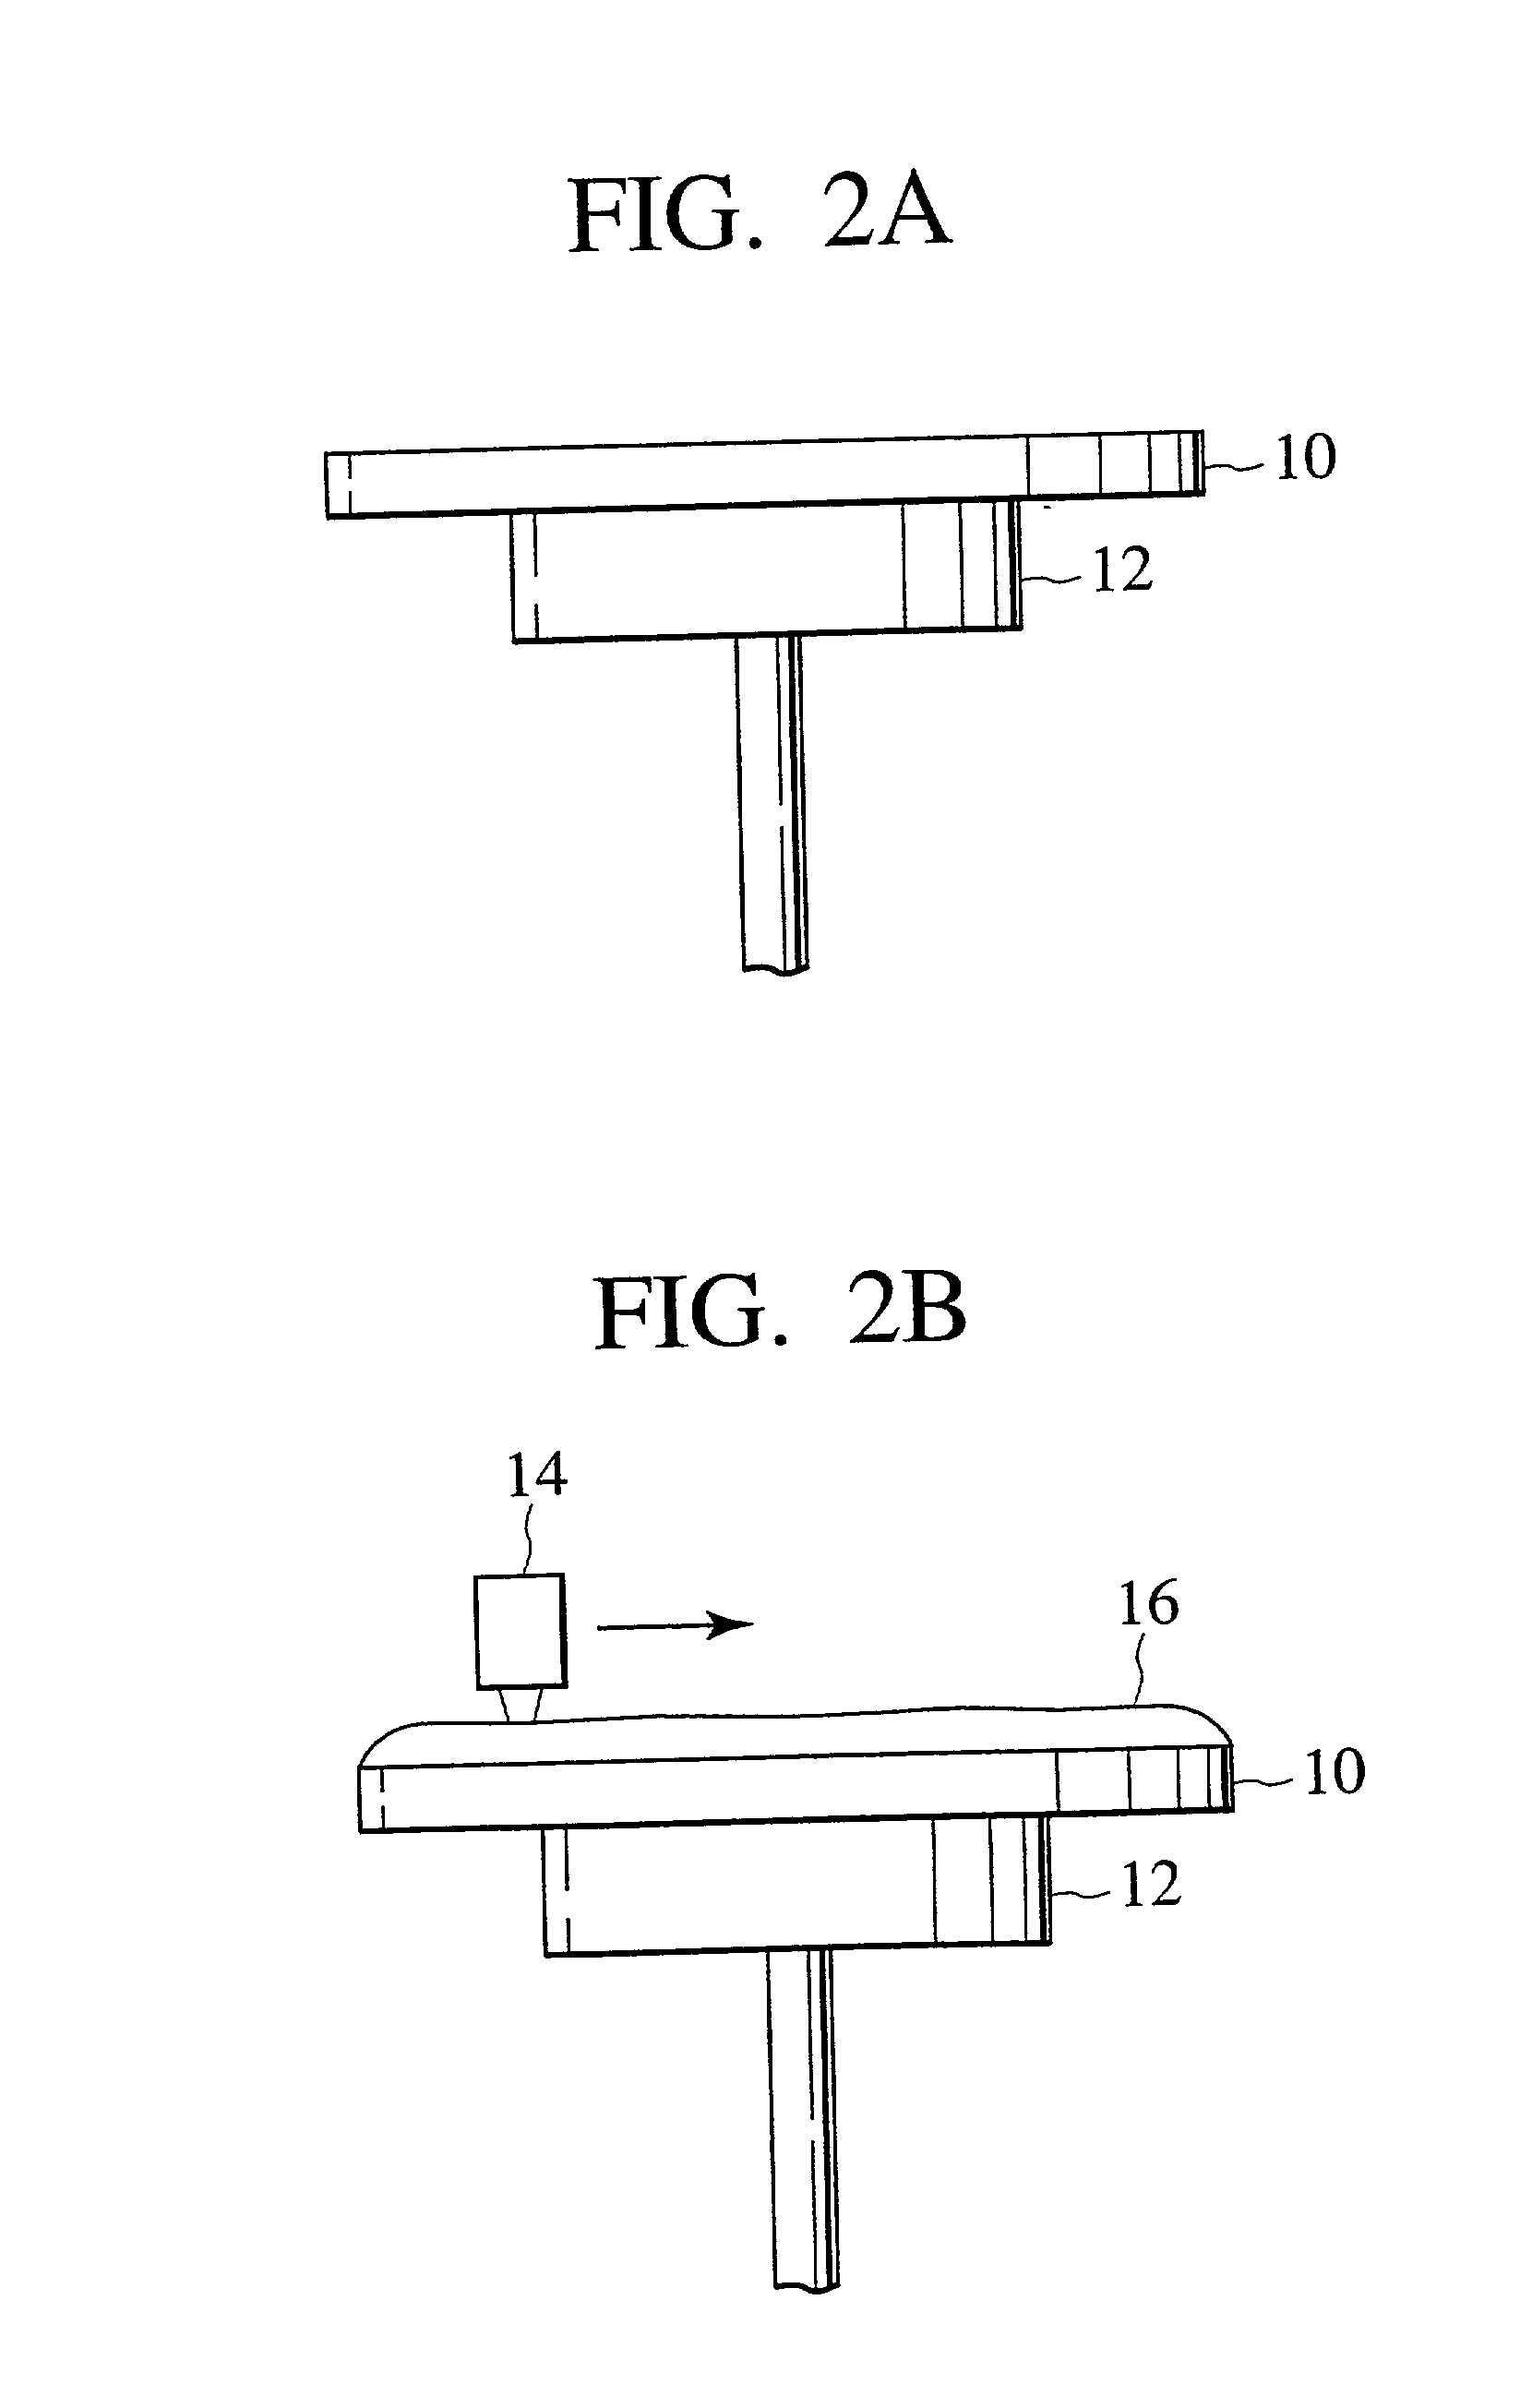 Chemical liquid processing apparatus for processing a substrate and the method thereof